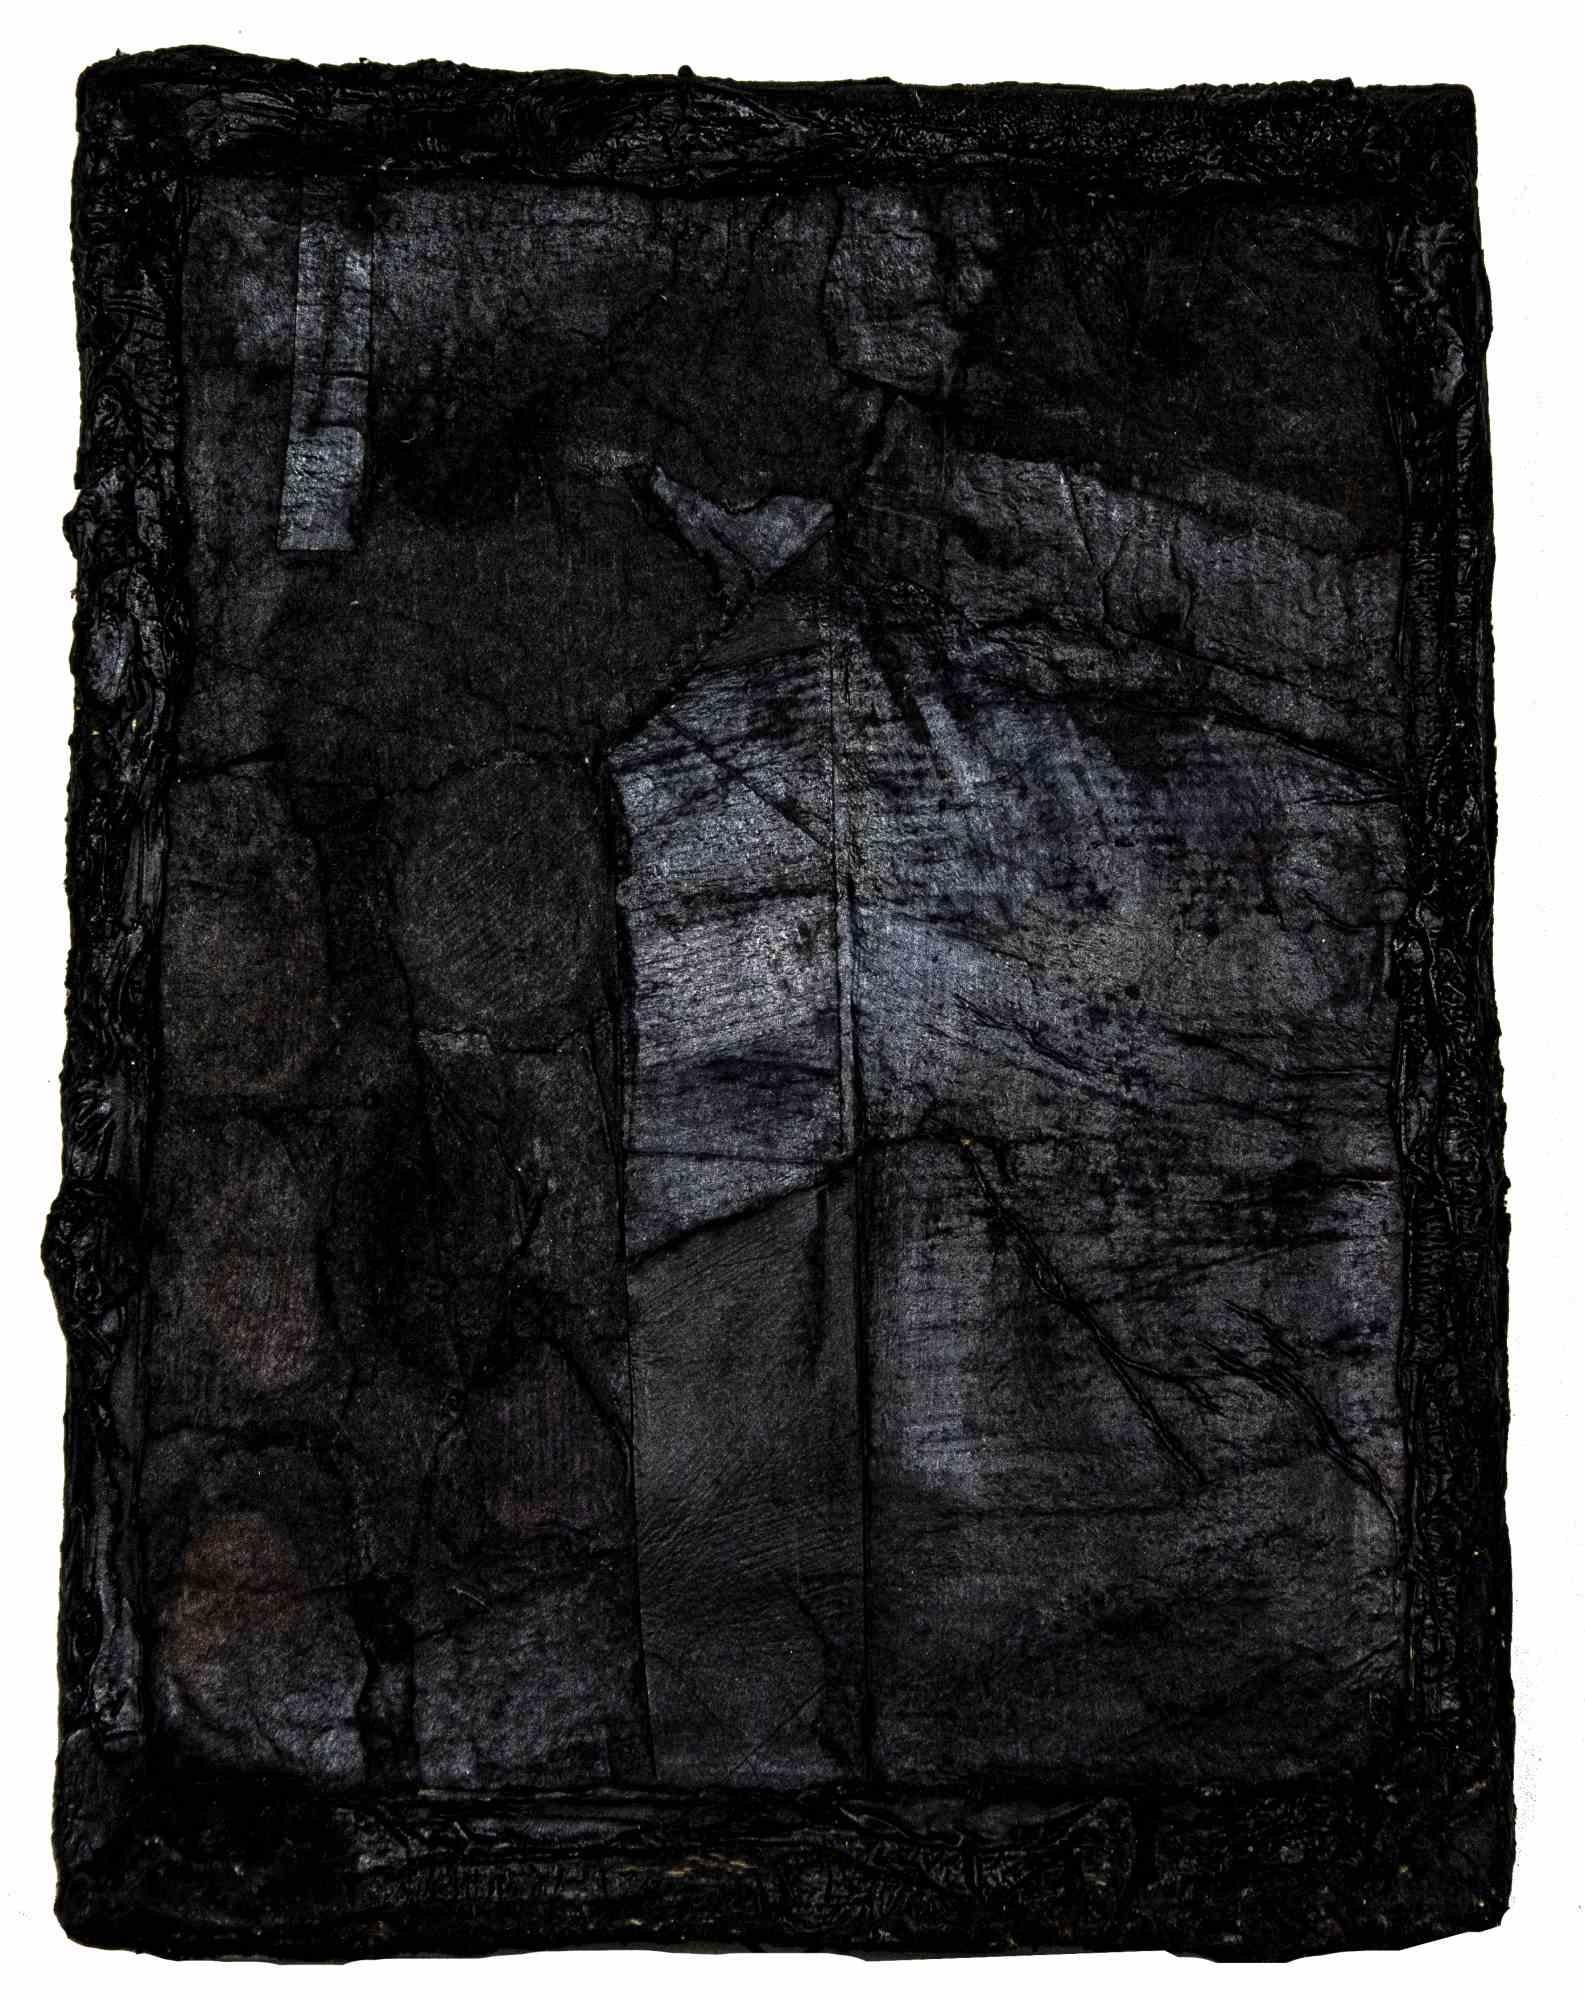 Black composition is an original contemporary artwork realized by Andrea Nurcis in 1987.

Metal on panel.

Hand signed and dated on the back.

The painting represents an abstract compositions.

Andrea Nurcis  is an Italian contemporary artist known